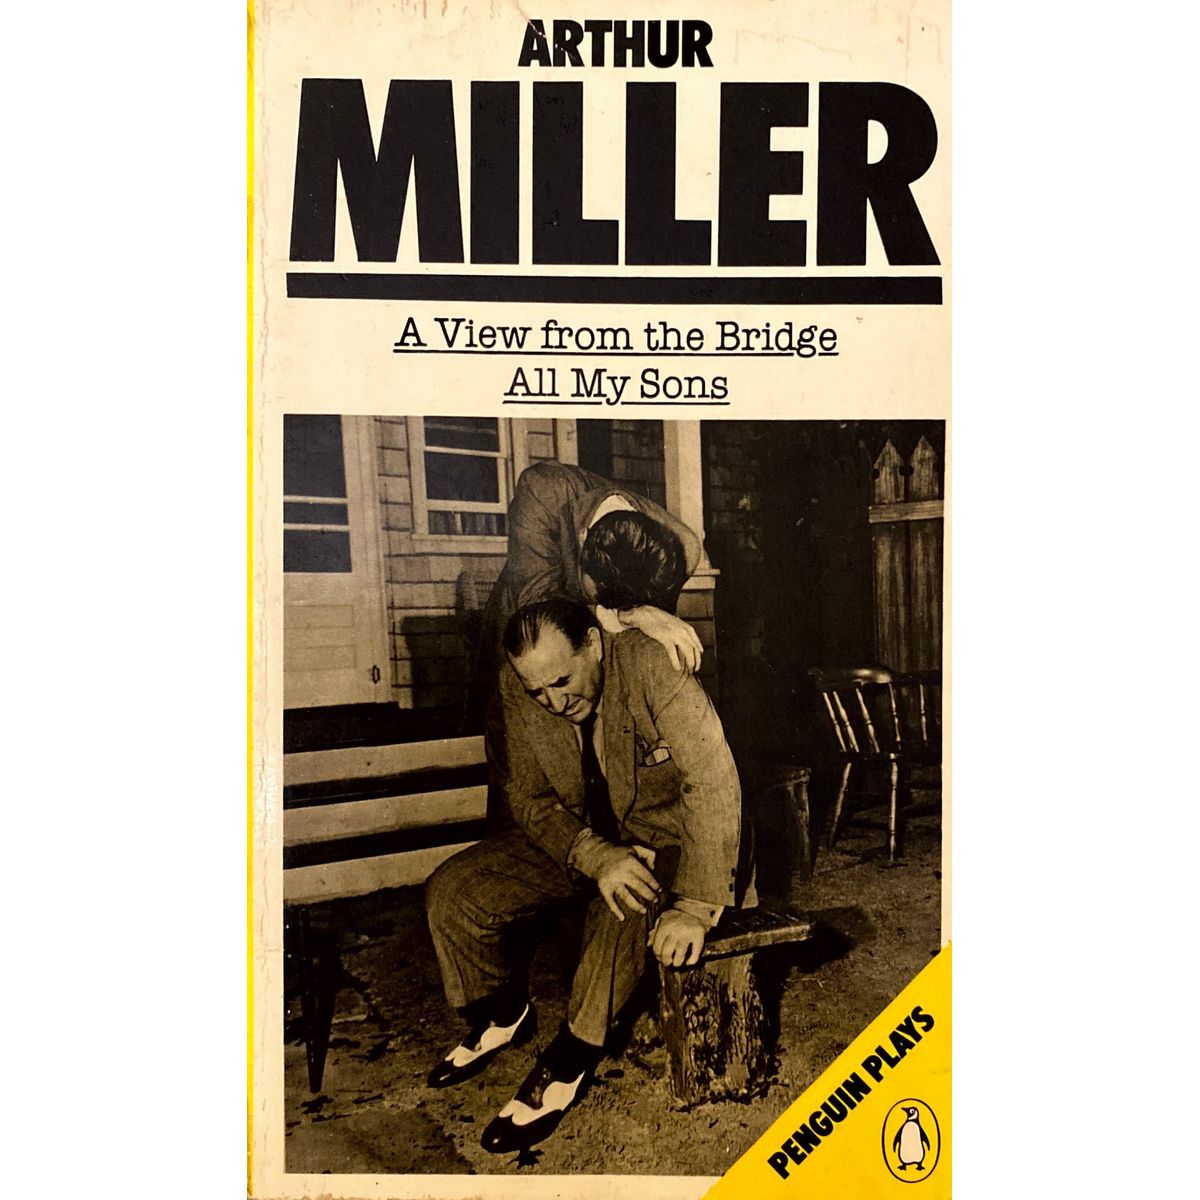 ISBN: 9780140480290 / 0140480293 - View from the Bridge & All My Sons by Arthur Miller [1984]